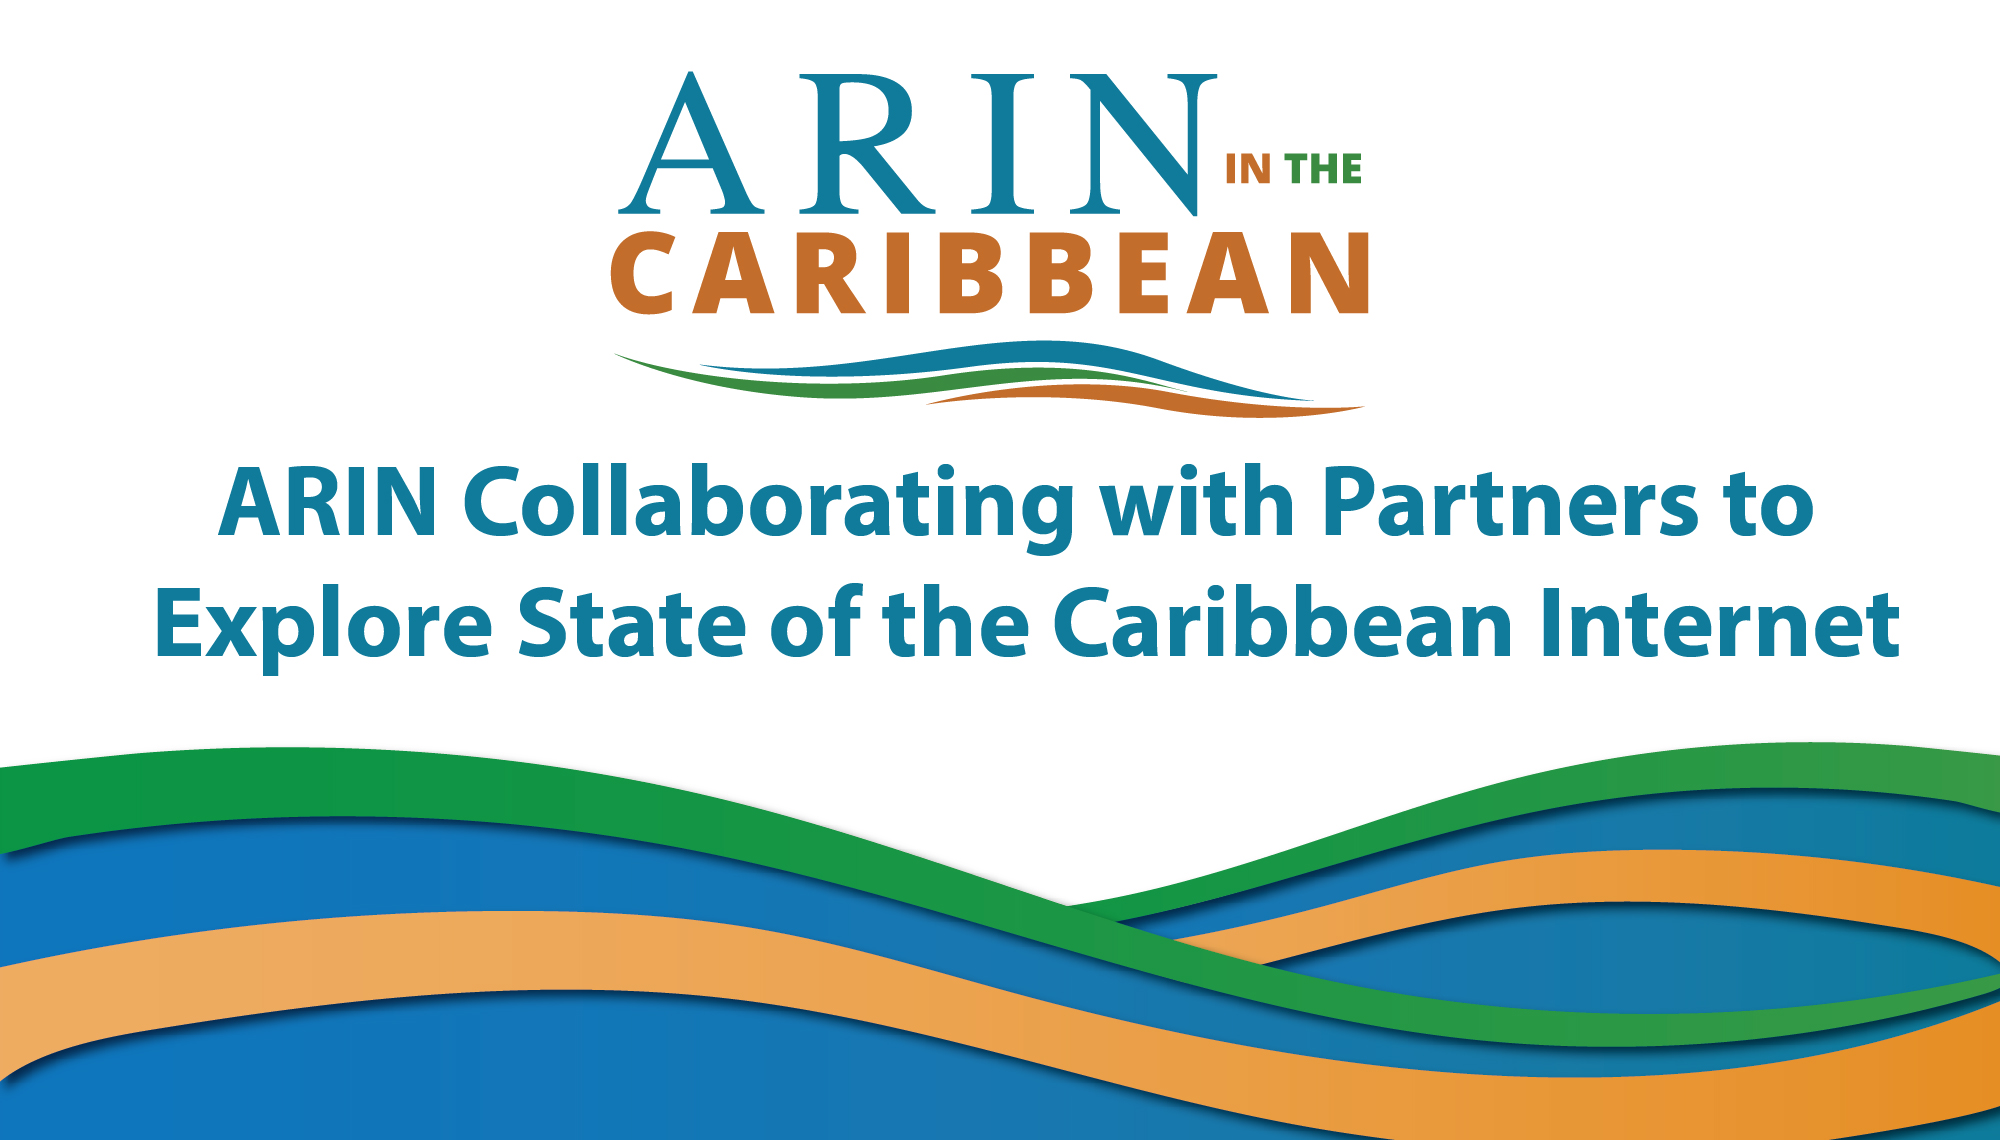 ARIN Collaborating with Partners to Explore State of the Caribbean Internet